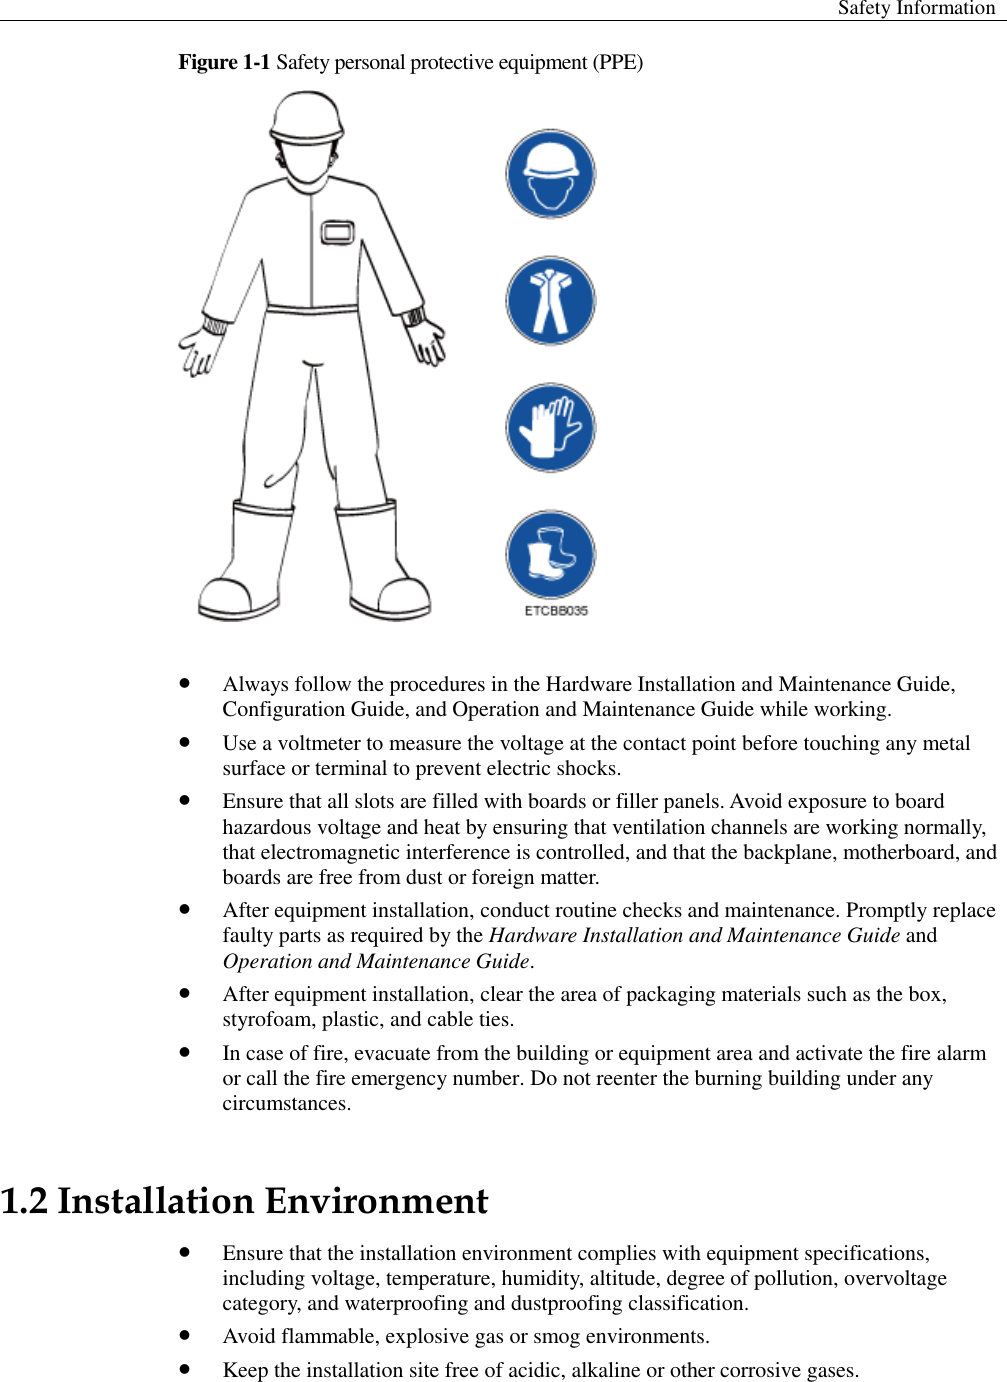  Safety Information  Figure 1-1 Safety personal protective equipment (PPE)    Always follow the procedures in the Hardware Installation and Maintenance Guide, Configuration Guide, and Operation and Maintenance Guide while working.  Use a voltmeter to measure the voltage at the contact point before touching any metal surface or terminal to prevent electric shocks.    Ensure that all slots are filled with boards or filler panels. Avoid exposure to board hazardous voltage and heat by ensuring that ventilation channels are working normally, that electromagnetic interference is controlled, and that the backplane, motherboard, and boards are free from dust or foreign matter.    After equipment installation, conduct routine checks and maintenance. Promptly replace faulty parts as required by the Hardware Installation and Maintenance Guide and Operation and Maintenance Guide.    After equipment installation, clear the area of packaging materials such as the box, styrofoam, plastic, and cable ties.  In case of fire, evacuate from the building or equipment area and activate the fire alarm or call the fire emergency number. Do not reenter the burning building under any circumstances.   1.2 Installation Environment    Ensure that the installation environment complies with equipment specifications, including voltage, temperature, humidity, altitude, degree of pollution, overvoltage category, and waterproofing and dustproofing classification.  Avoid flammable, explosive gas or smog environments.  Keep the installation site free of acidic, alkaline or other corrosive gases.   